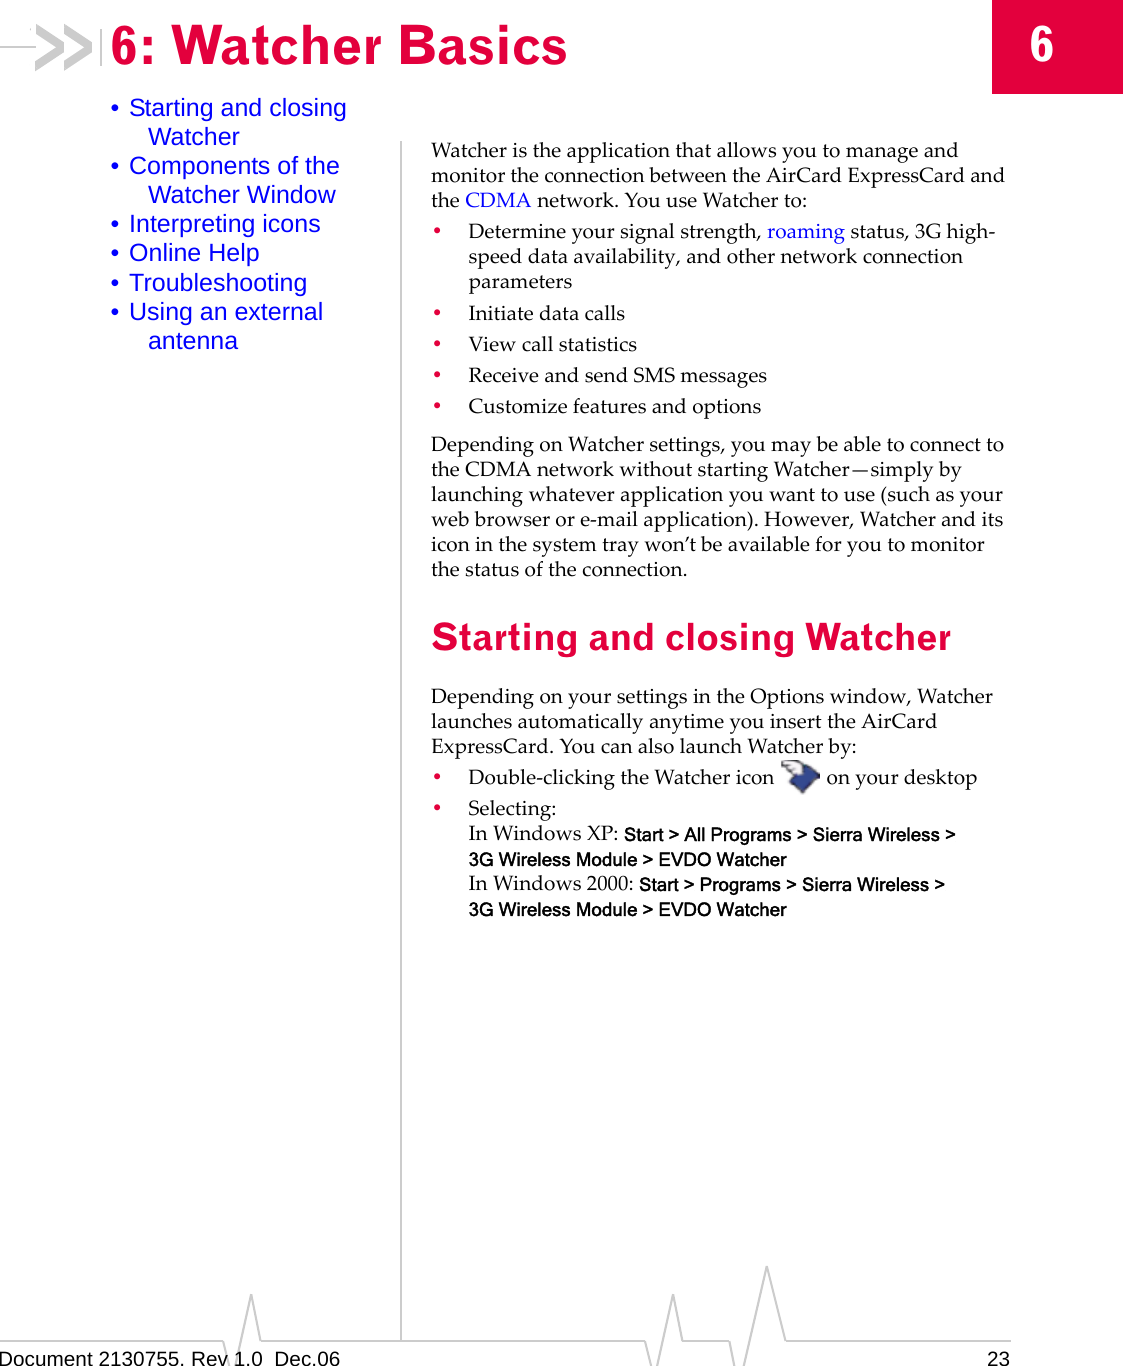 Document 2130755. Rev 1.0  Dec.06 2366: Watcher Basics• Starting and closing Watcher• Components of the Watcher Window• Interpreting icons• Online Help• Troubleshooting• Using an external antennaWatcheristheapplicationthatallowsyoutomanageandmonitortheconnectionbetweentheAirCardExpressCardandtheCDMAnetwork.YouuseWatcherto:•Determineyoursignalstrength,roamingstatus,3Ghigh‐speeddataavailability,andothernetworkconnectionparameters•Initiatedatacalls•Viewcallstatistics•ReceiveandsendSMSmessages•CustomizefeaturesandoptionsDependingonWatchersettings,youmaybeabletoconnecttotheCDMAnetworkwithoutstartingWatcher—simplybylaunchingwhateverapplicationyouwanttouse(suchasyourwebbrowserore‐mailapplication).However,Watcheranditsiconinthesystemtraywon’tbeavailableforyoutomonitorthestatusoftheconnection.Starting and closing WatcherDependingonyoursettingsintheOptionswindow,WatcherlaunchesautomaticallyanytimeyouinserttheAirCardExpressCard.YoucanalsolaunchWatcherby:•Double‐clickingtheWatchericon onyourdesktop•Selecting:InWindowsXP:Start &gt; All Programs &gt; Sierra Wireless &gt; 3G Wireless Module &gt; EVDO WatcherInWindows2000:Start &gt; Programs &gt; Sierra Wireless &gt; 3G Wireless Module &gt; EVDO Watcher